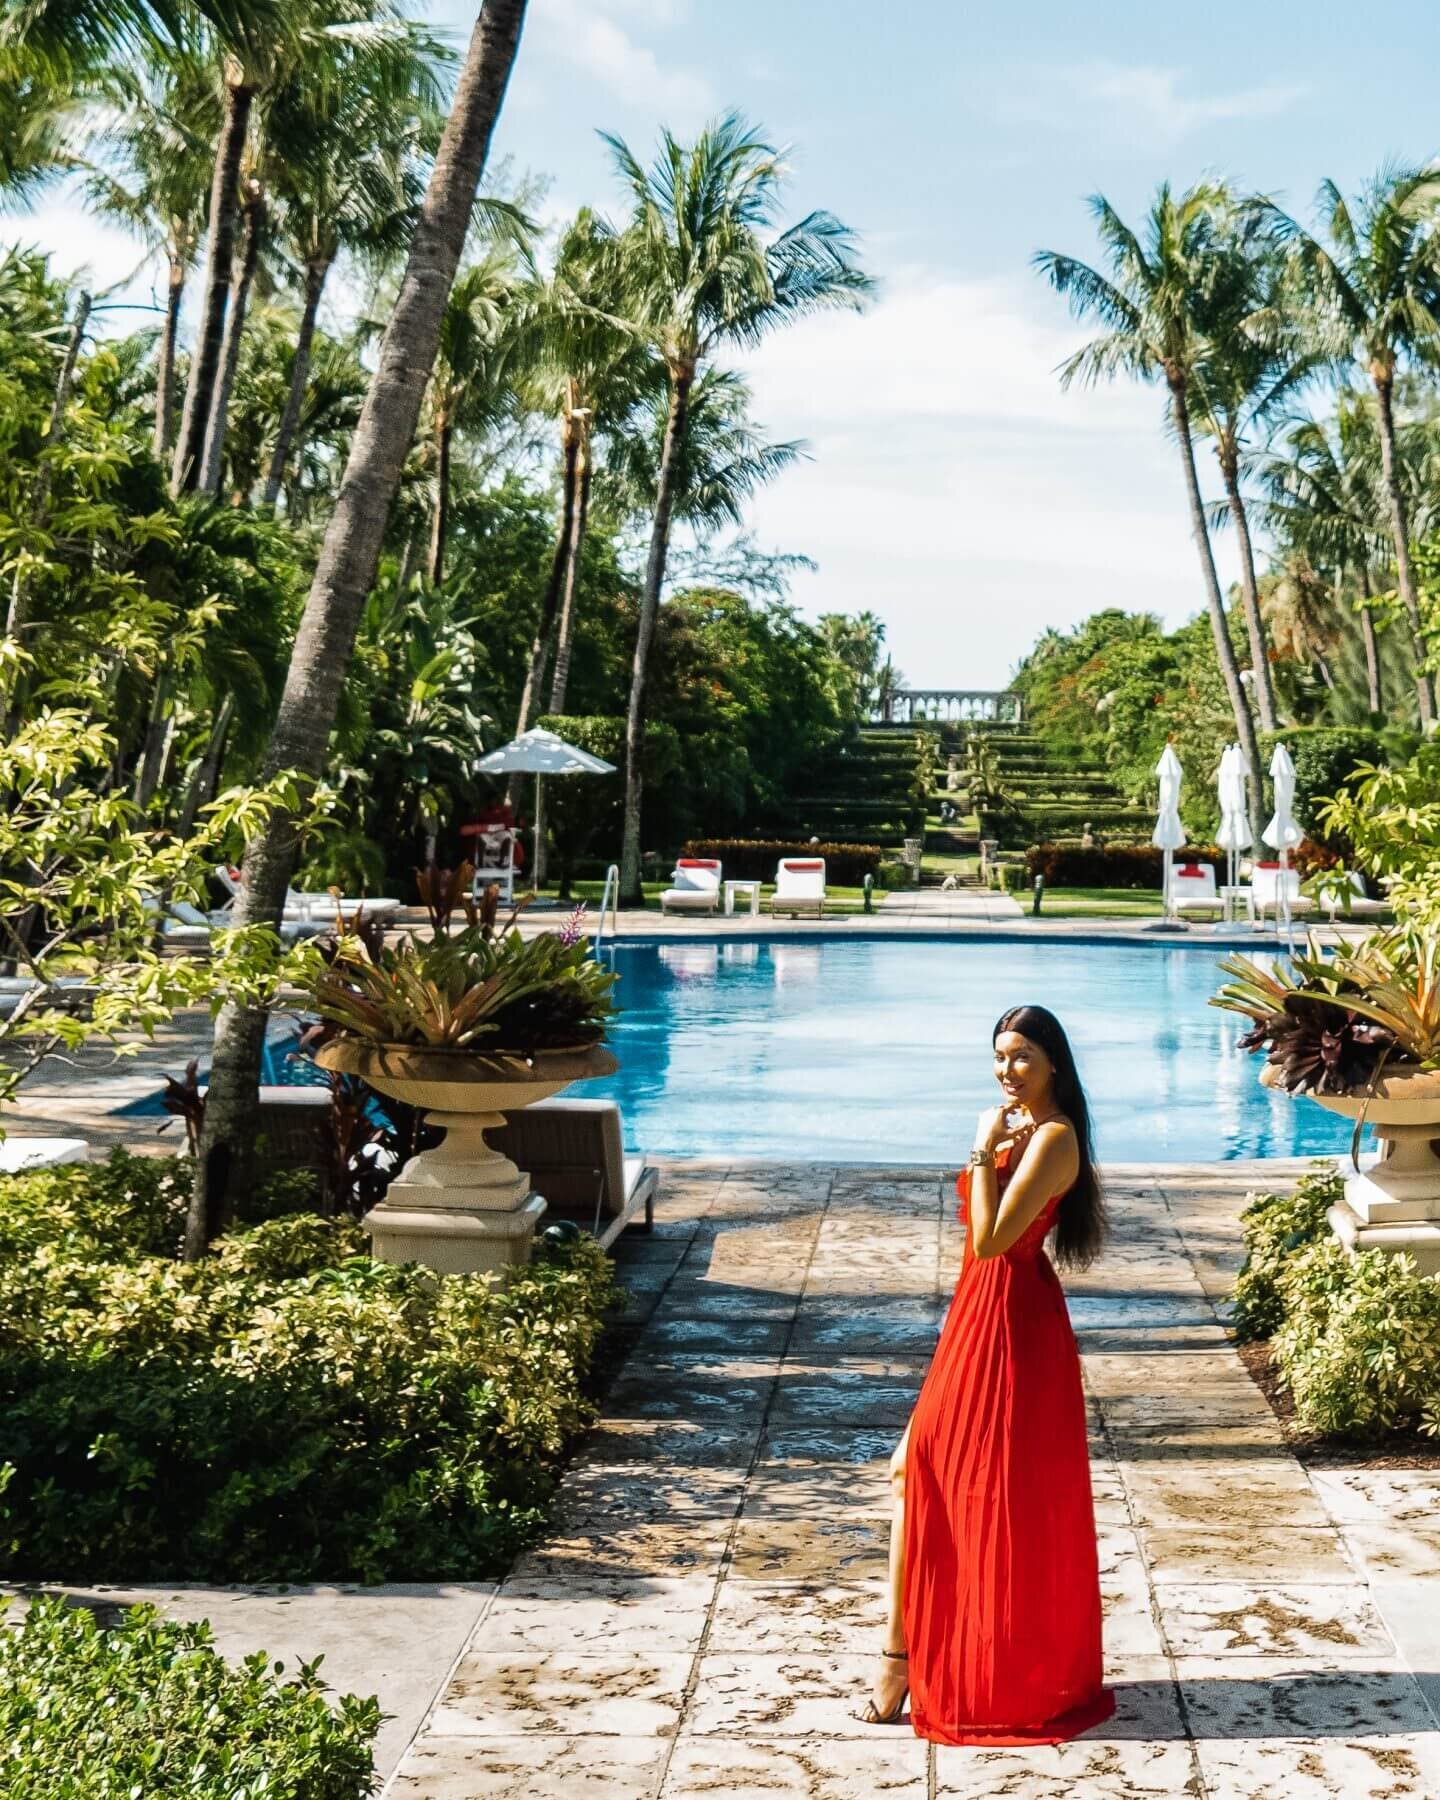 Isabella standing in red dress by pool - luxury travel blogger